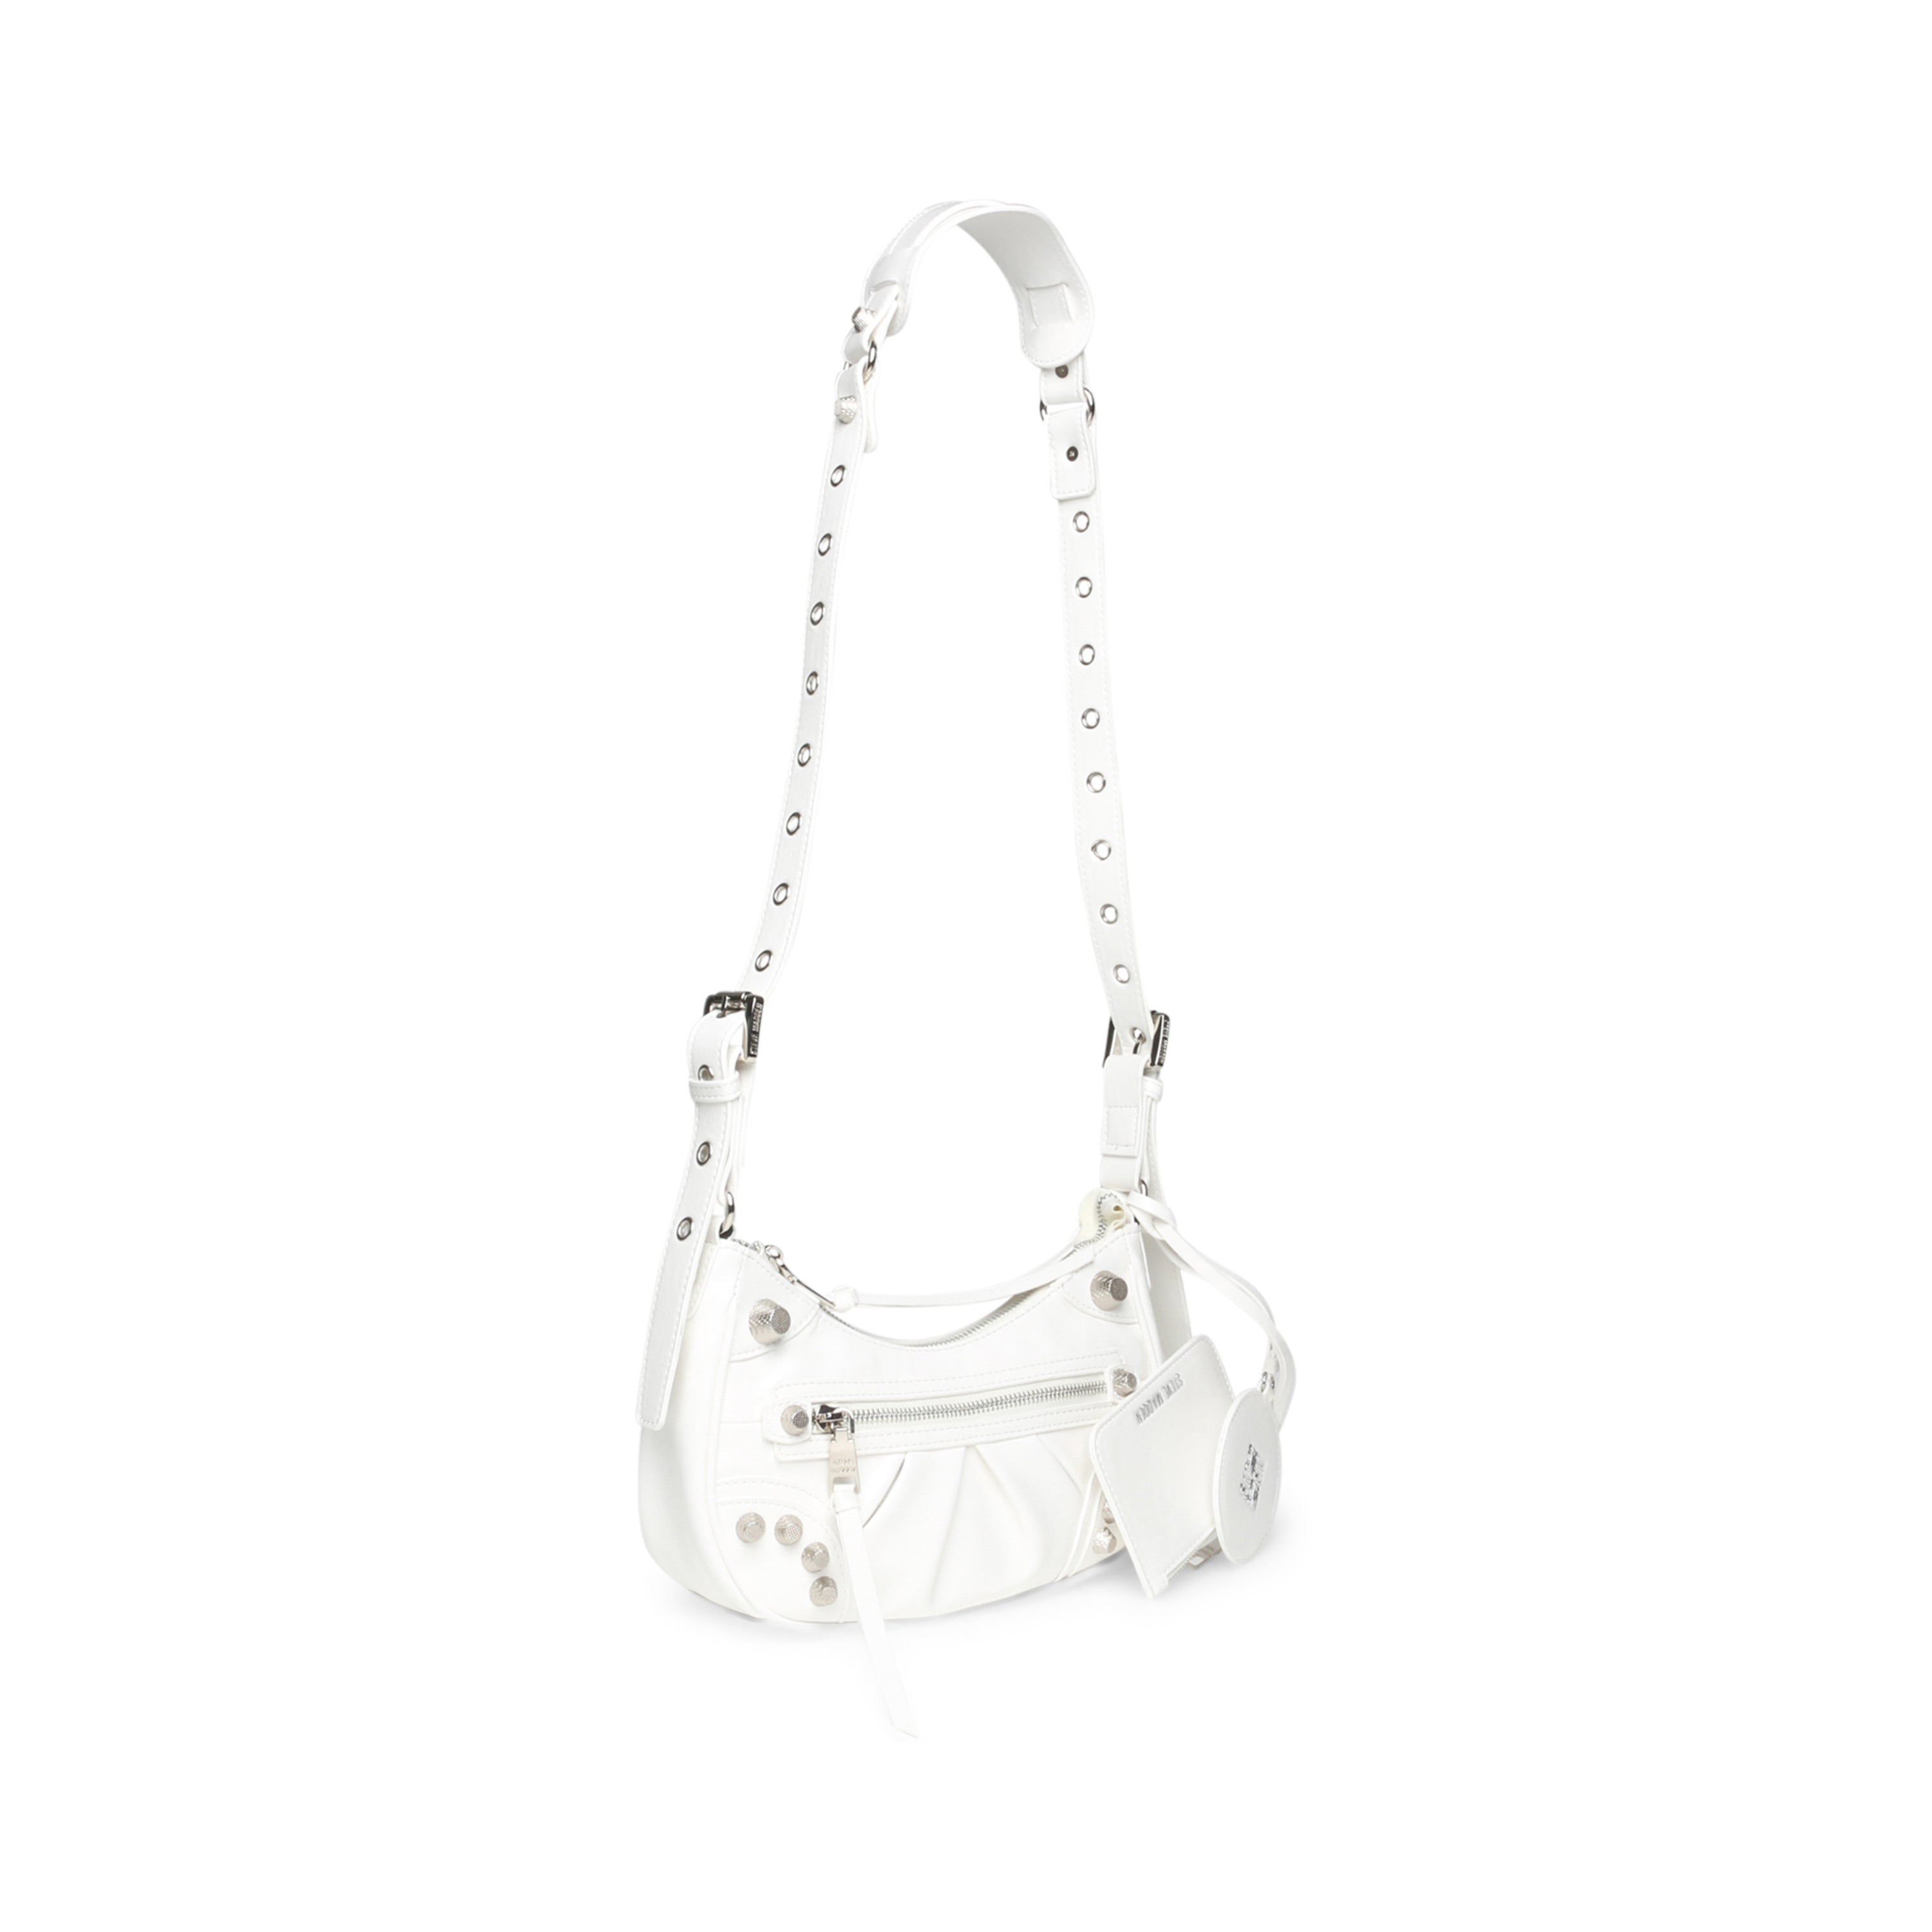 Bglowing Crossbody Bag White- Hover Image